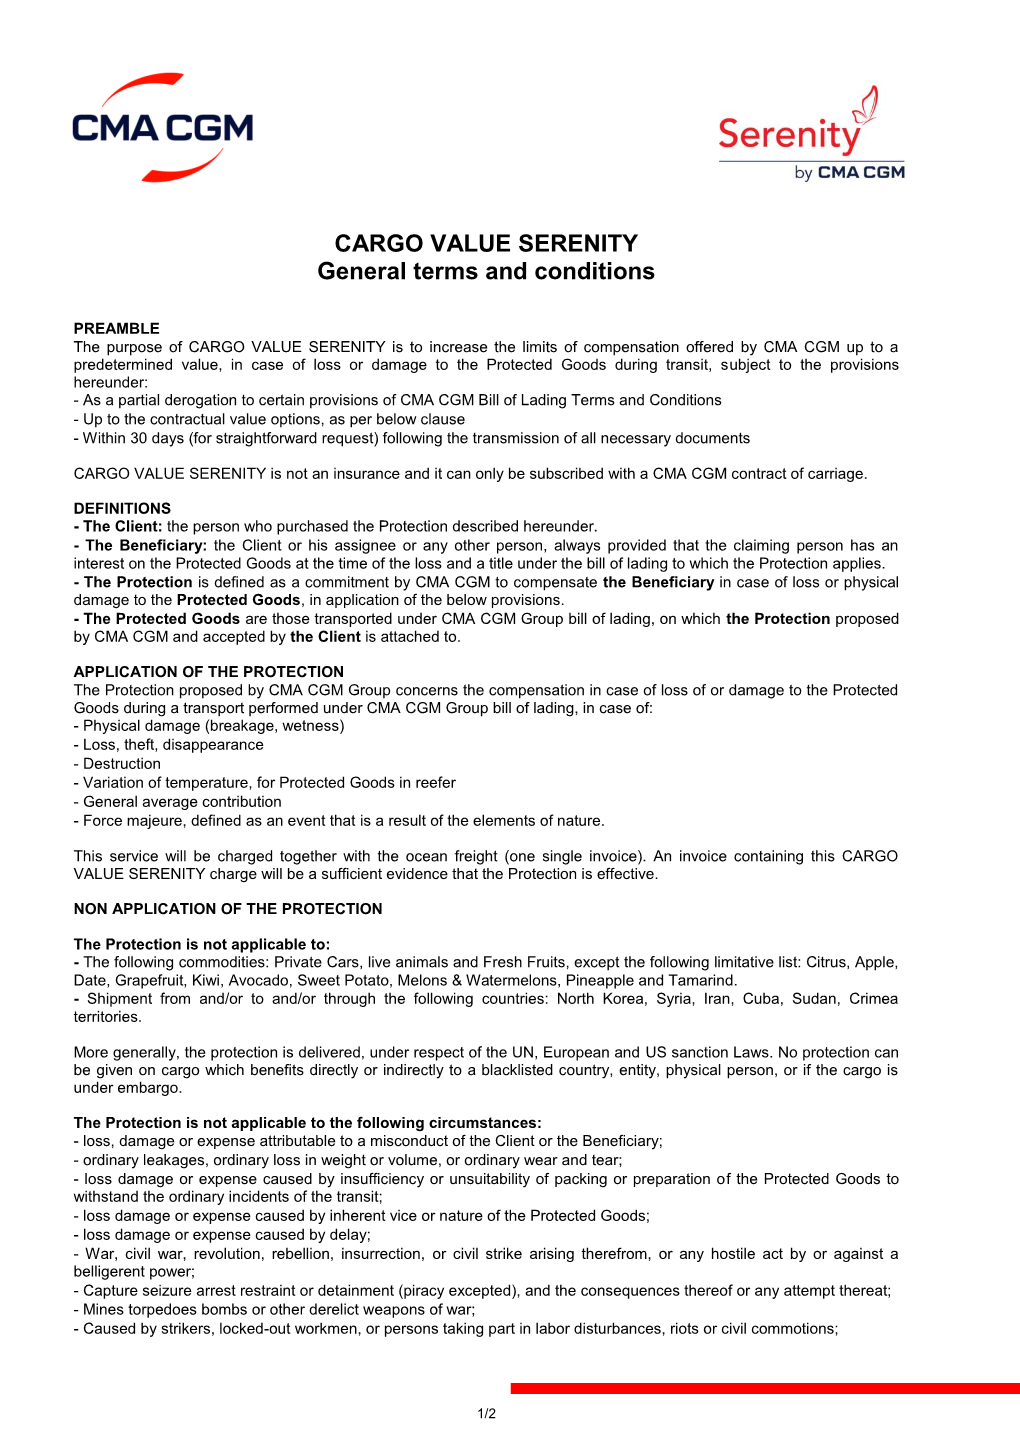 CARGO VALUE SERENITY General Terms and Conditions